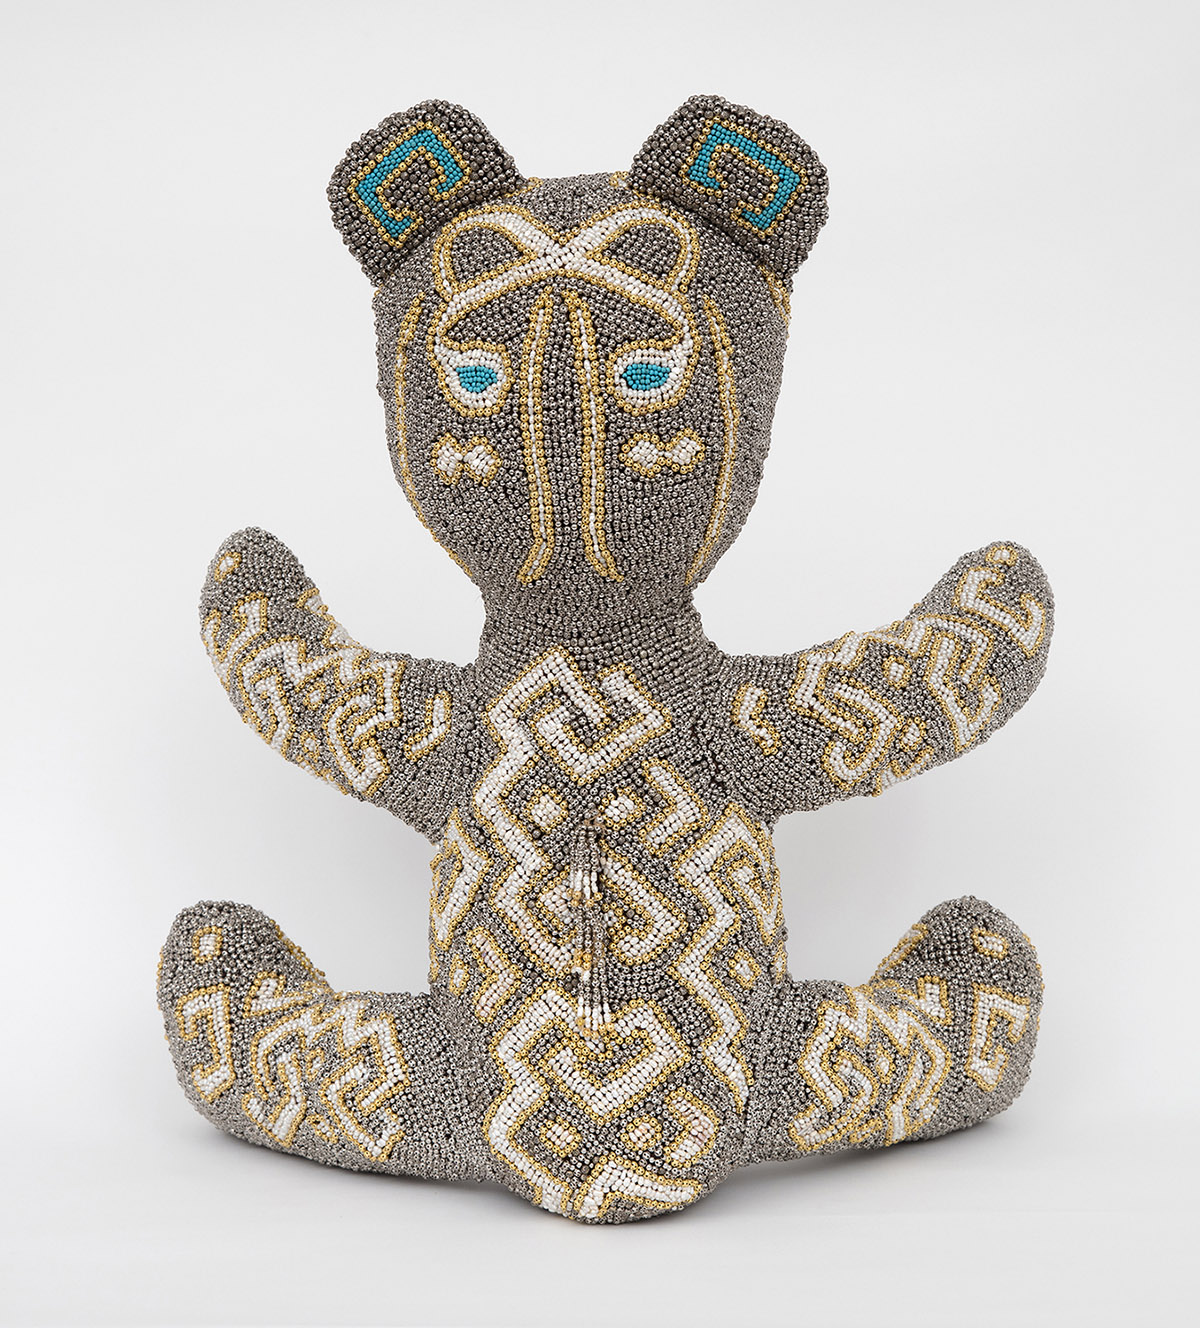 Zemi is a teddy bear made out of recycled US army uniforms. The surface of the bear is entirely covered with silver-grey zinc and gold beads, pearls and lapis lazuli stones. It was inspired by the Beaded Zemi in Rome's Pigorini Museum, one of the finest surviving examples of Taino art produced before the disappearance of this culture in 16th century. Tainos were the principal inhabitants of Puerto Rico, Cuba, Jamaica, Hispaniola and Florida before the settlement of the region by Spanish colonists. Similar to a fetish object, the Beaded Zemi represents a supernatural character with coexisting Taino, African and European features.